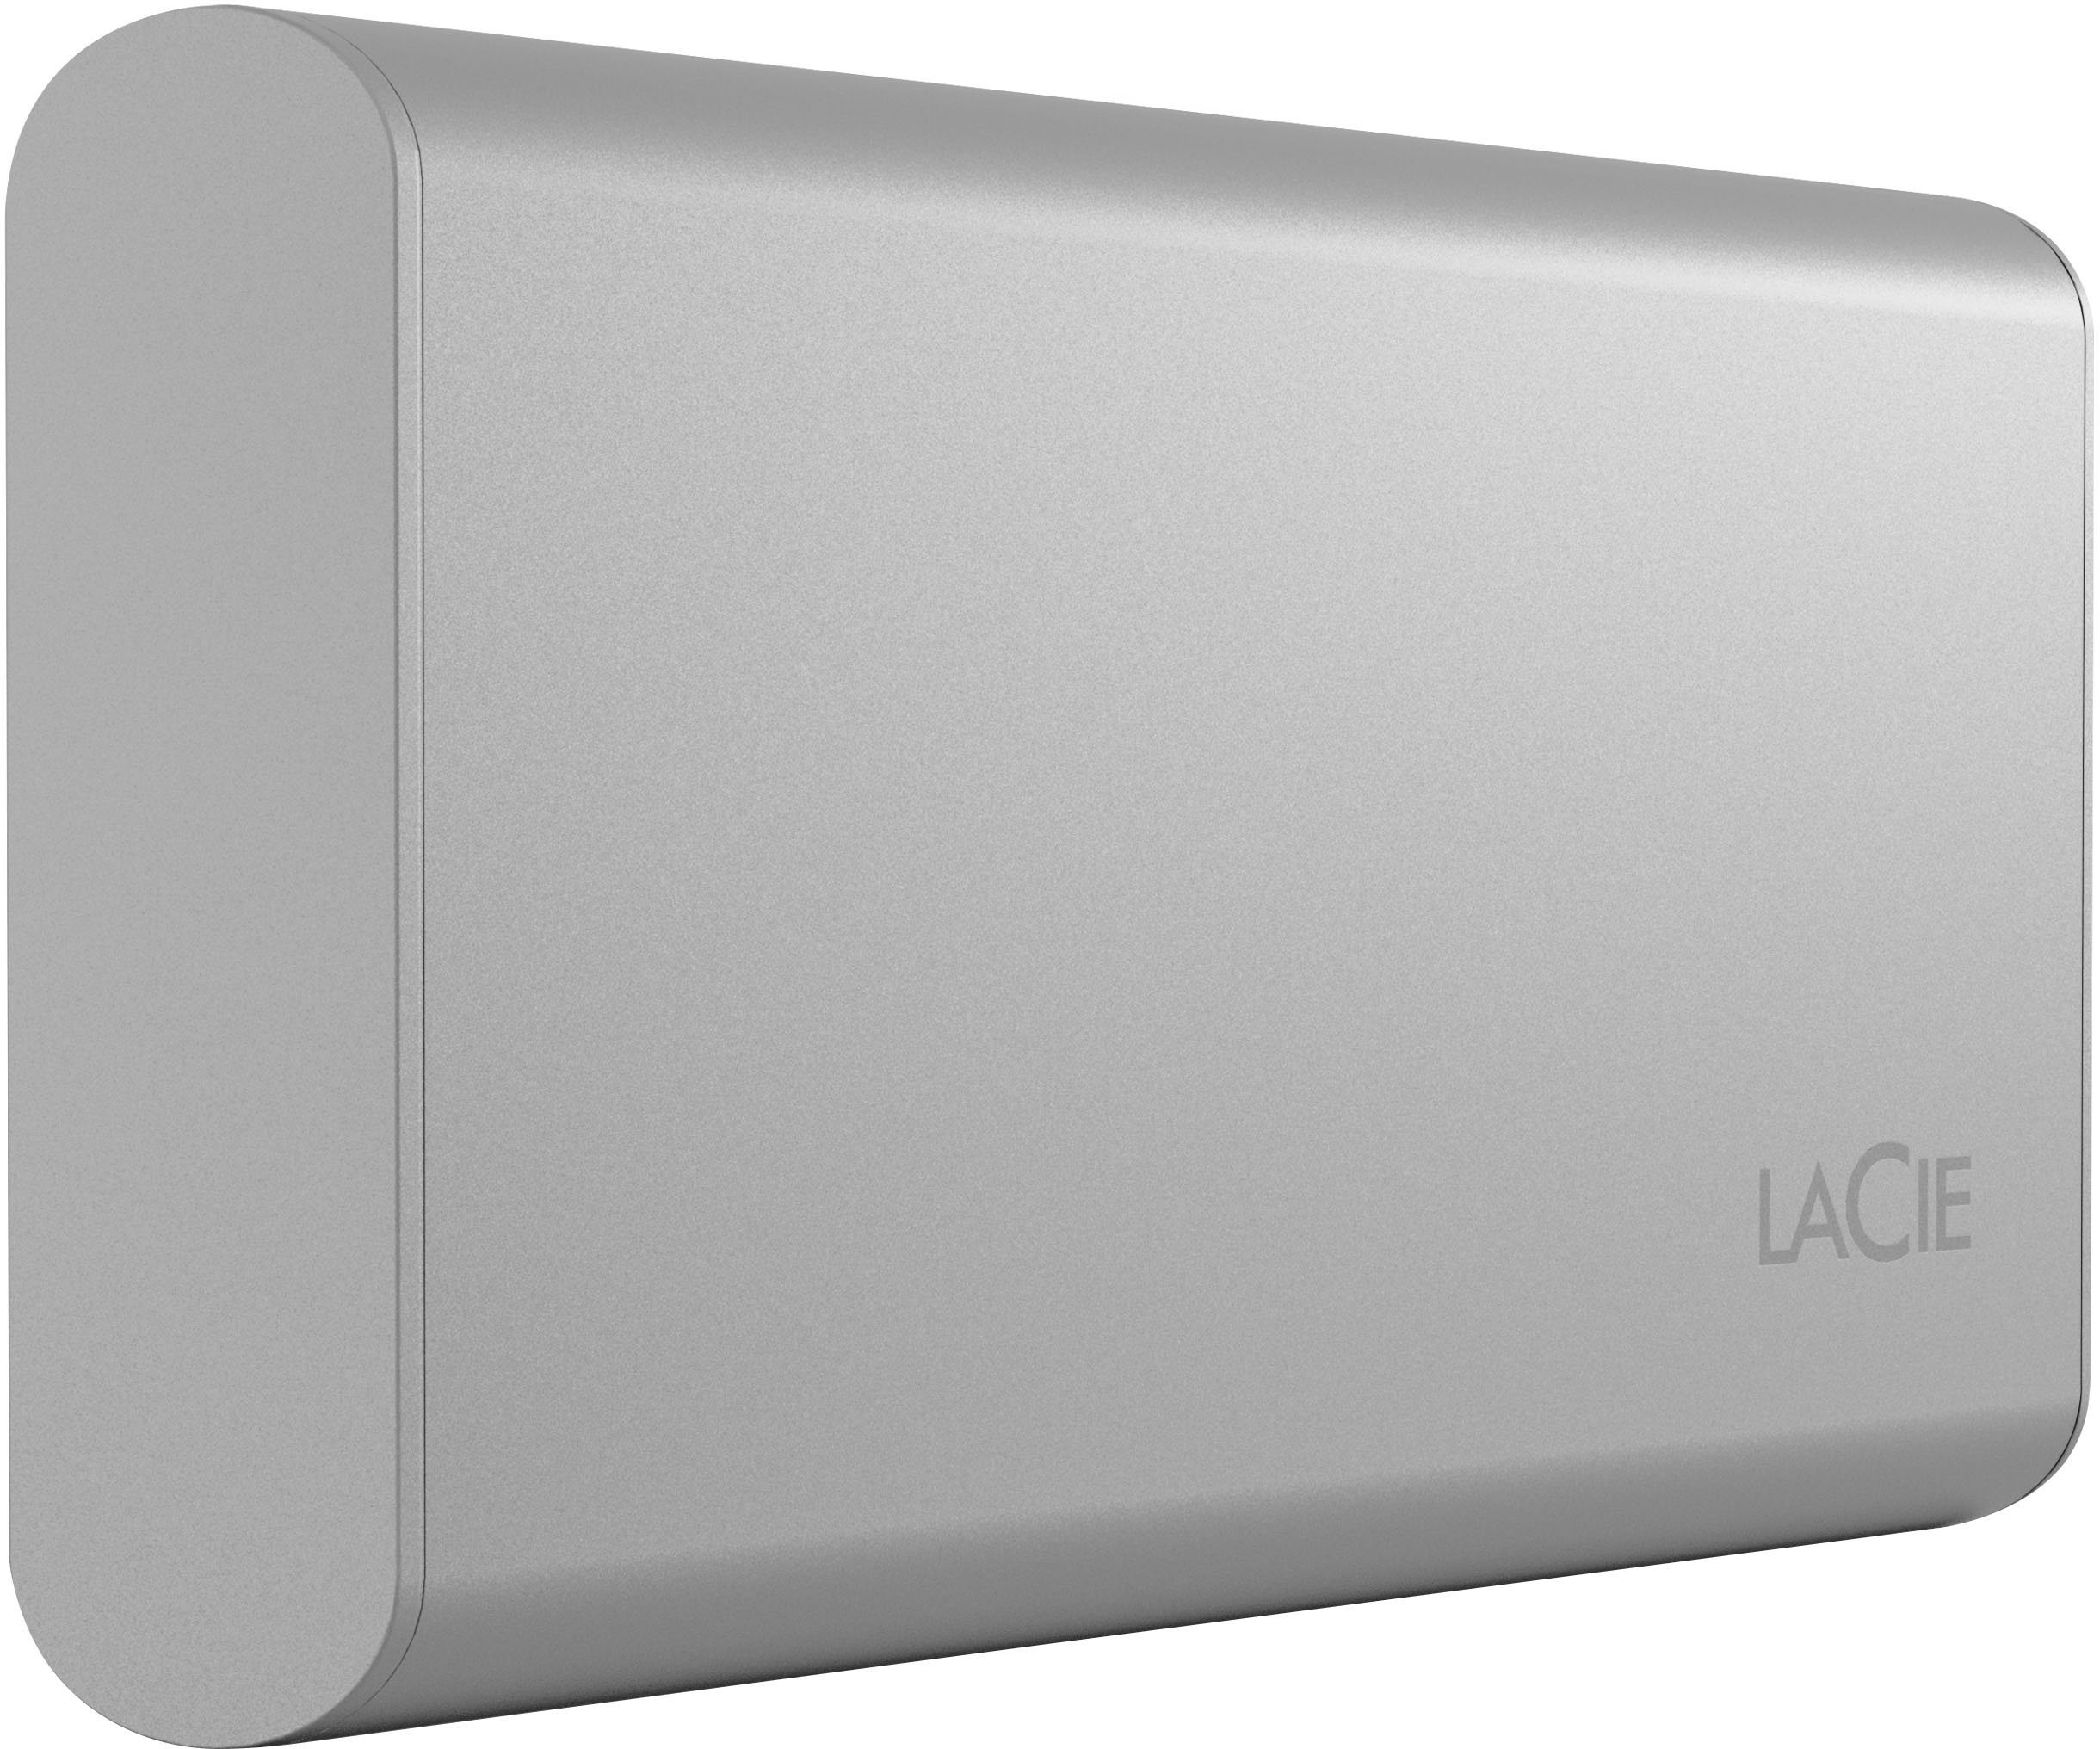 USB 3.2 Gen 2 LaCie Portable SSD 2TB External Solid State Drive for Mac PC and iPad speeds up to 1050MB/s USB-C Moon Silver STKS2000400 with Rescue Services 